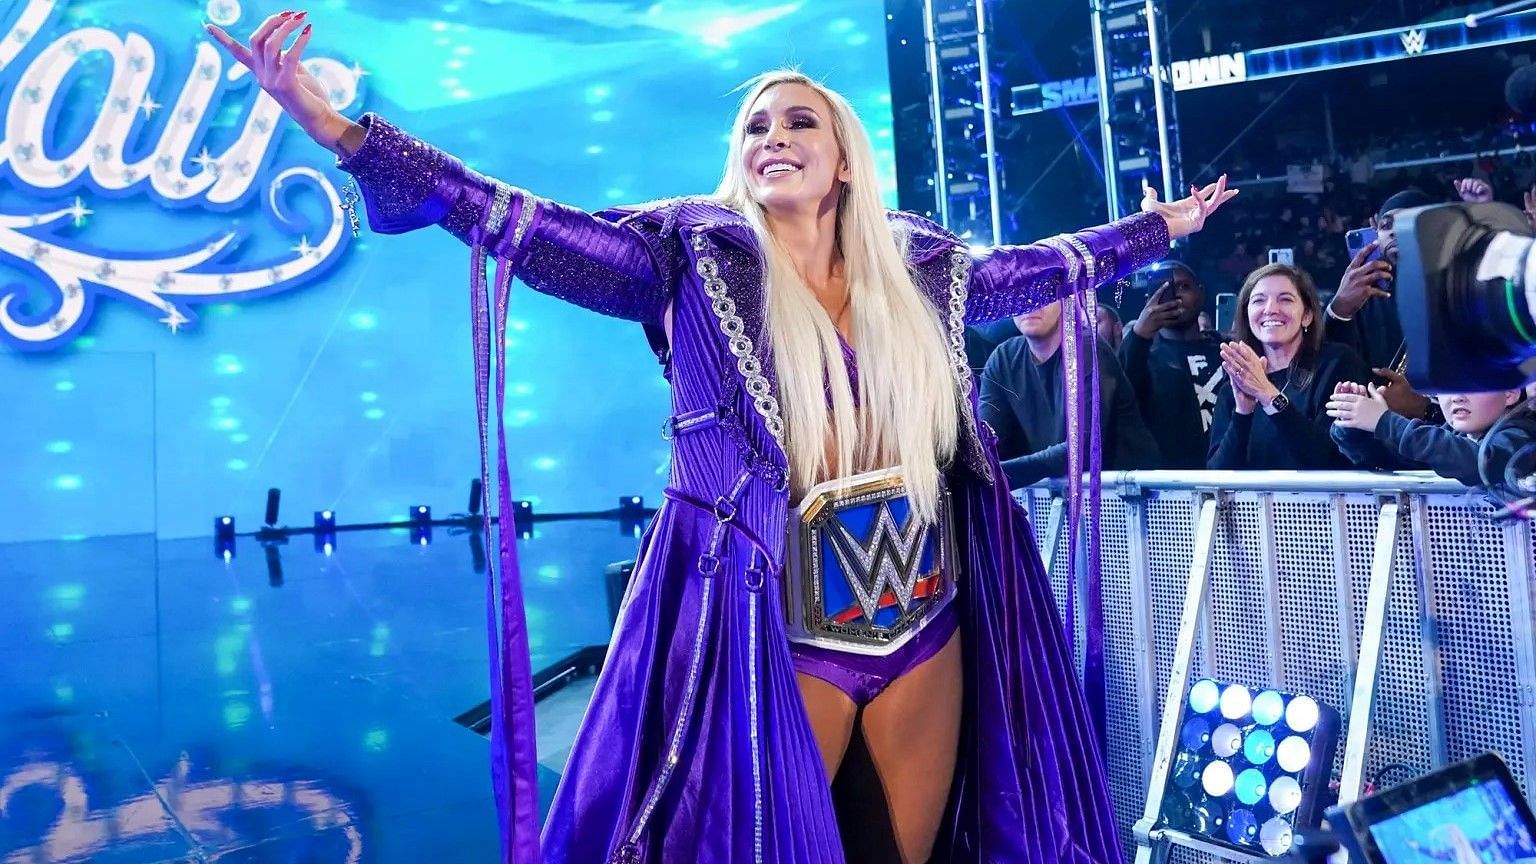 Charlotte Flair is the reigning SmackDown Women